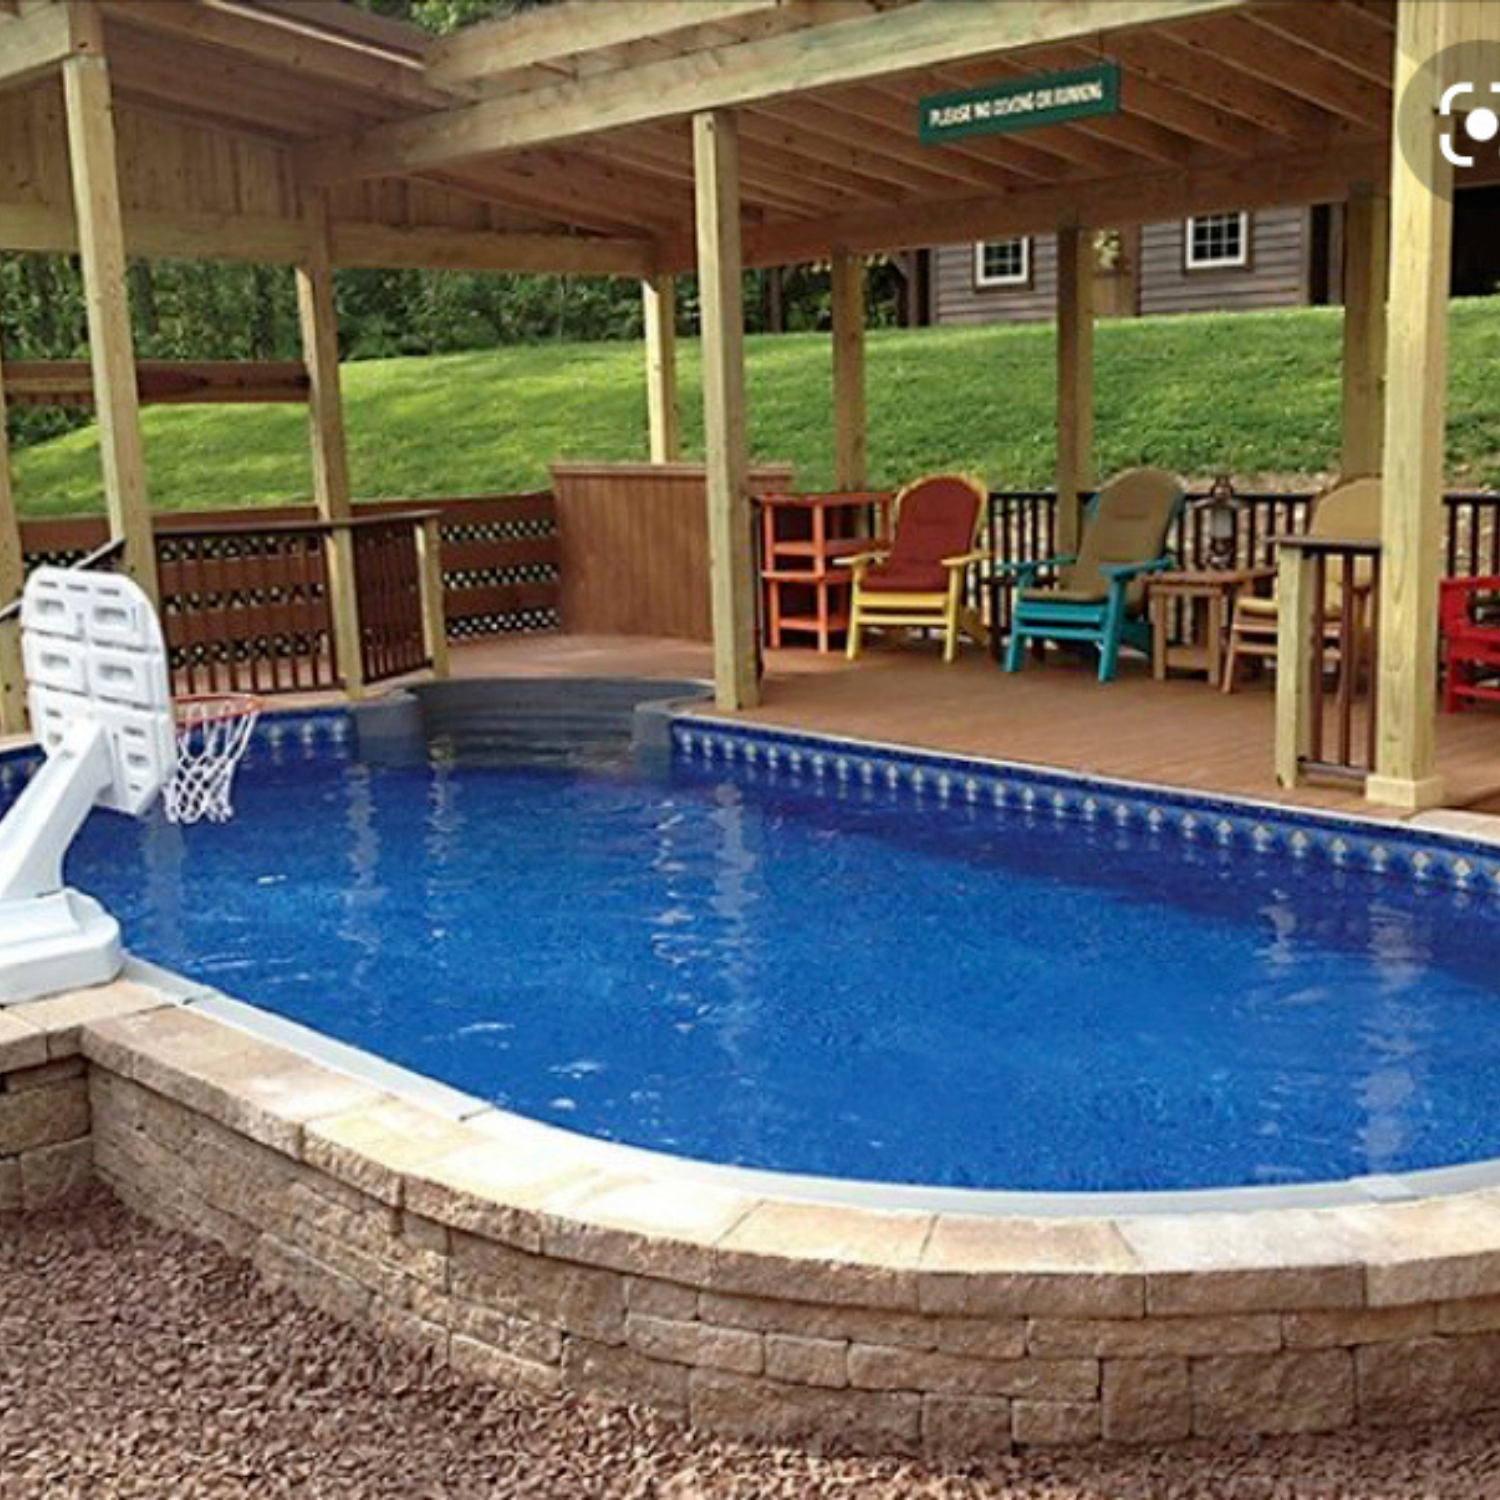 Lexren Outdoor Living and Pool Installation in Indian Trail, NC